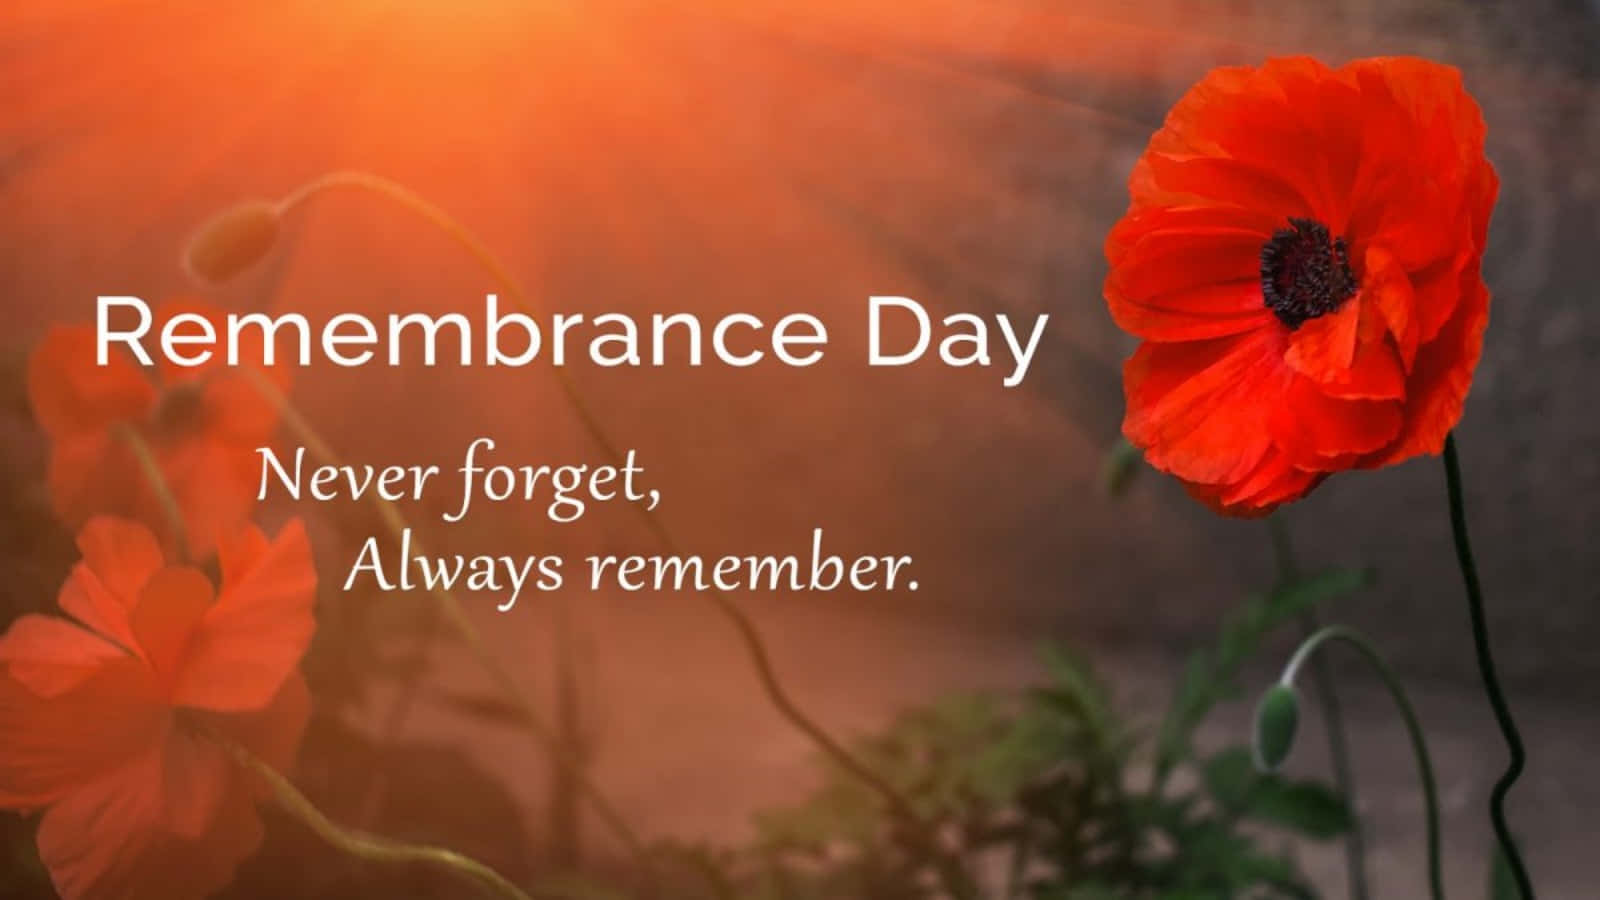 Download Remembrance Day Quotes And Sayings | Wallpapers.com